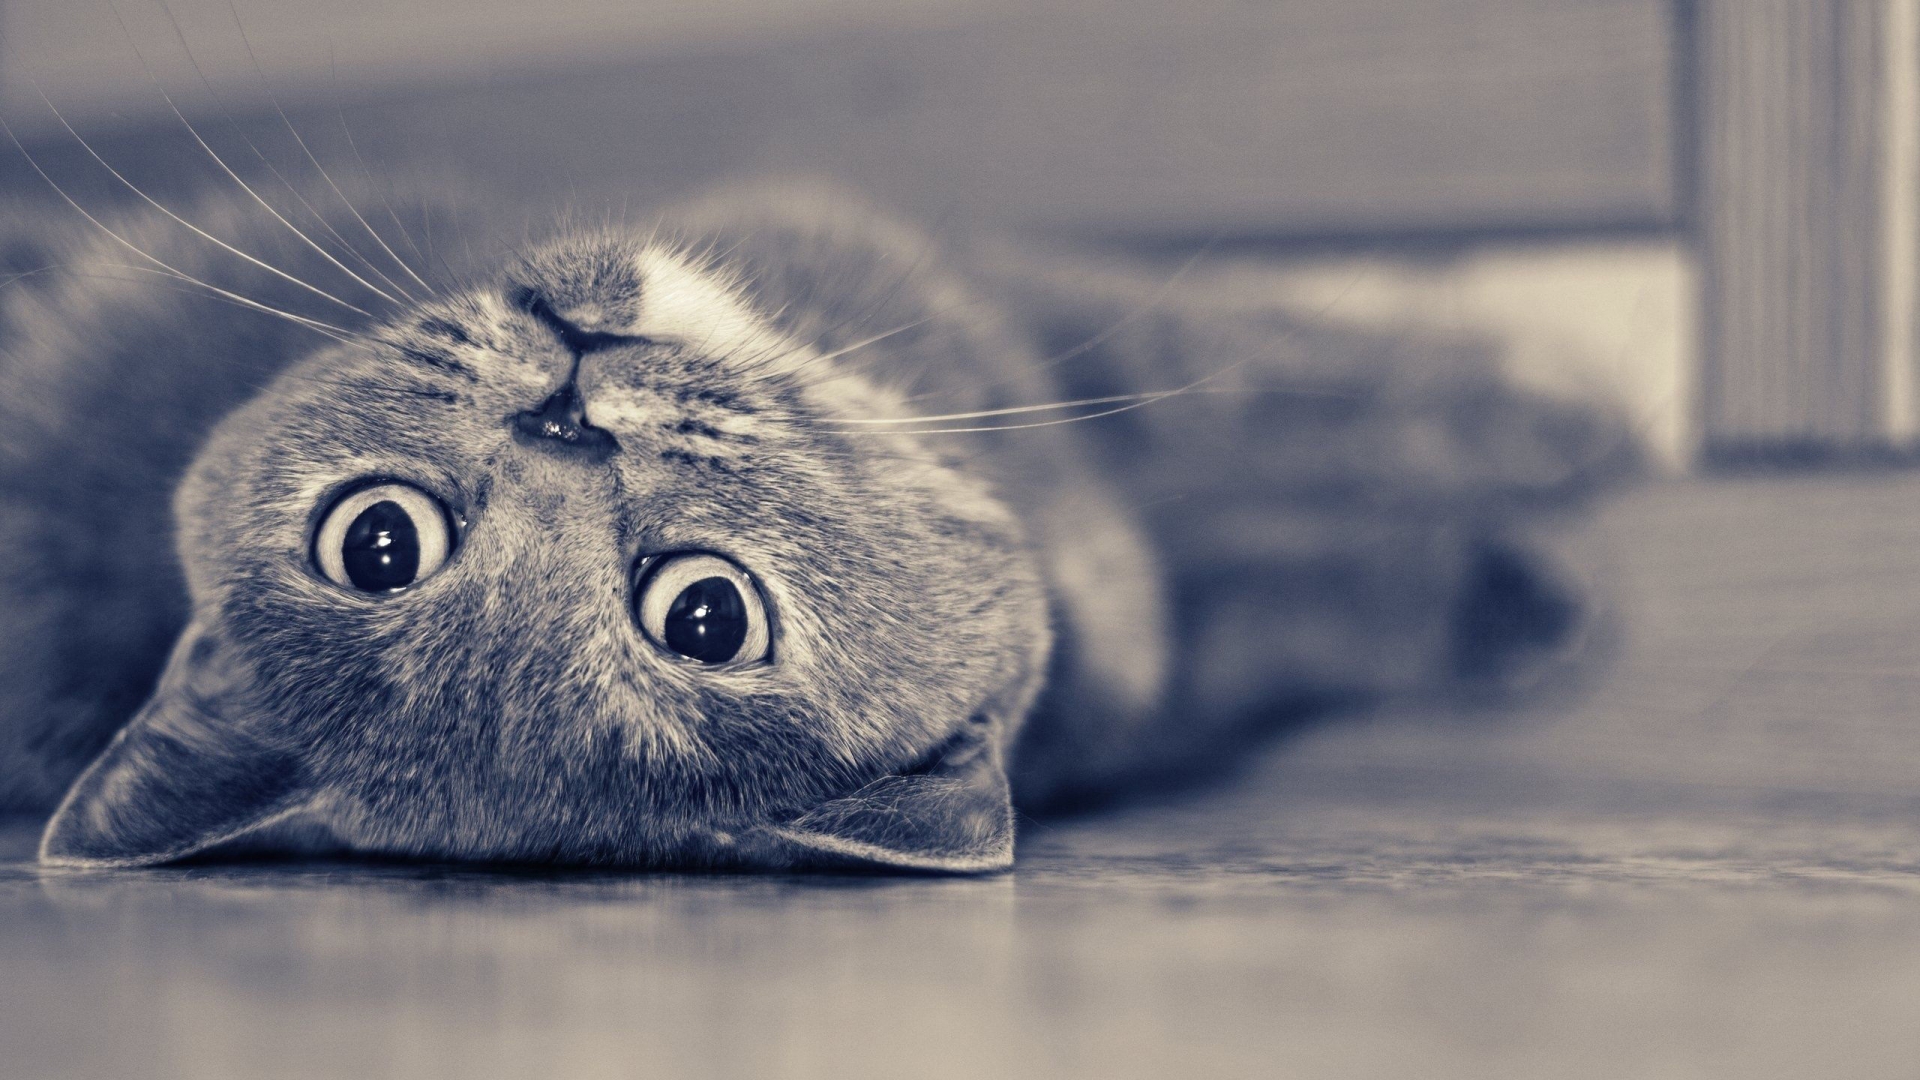 Vintage Cute Cat for 1920 x 1080 HDTV 1080p resolution